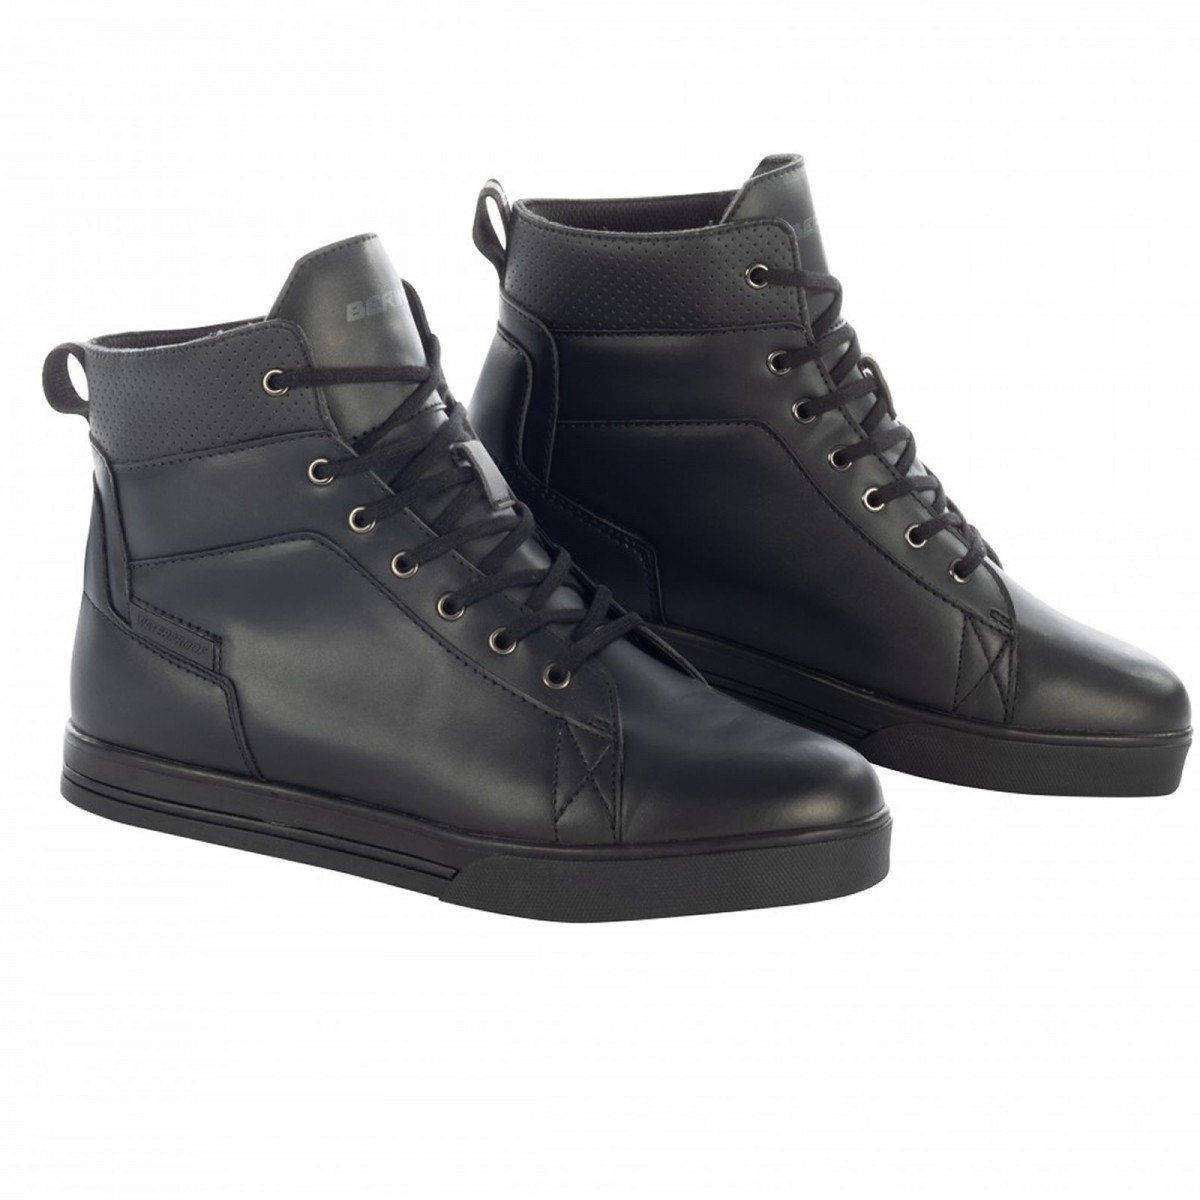 Image of EU Bering Indy Noir Chaussures Taille 46